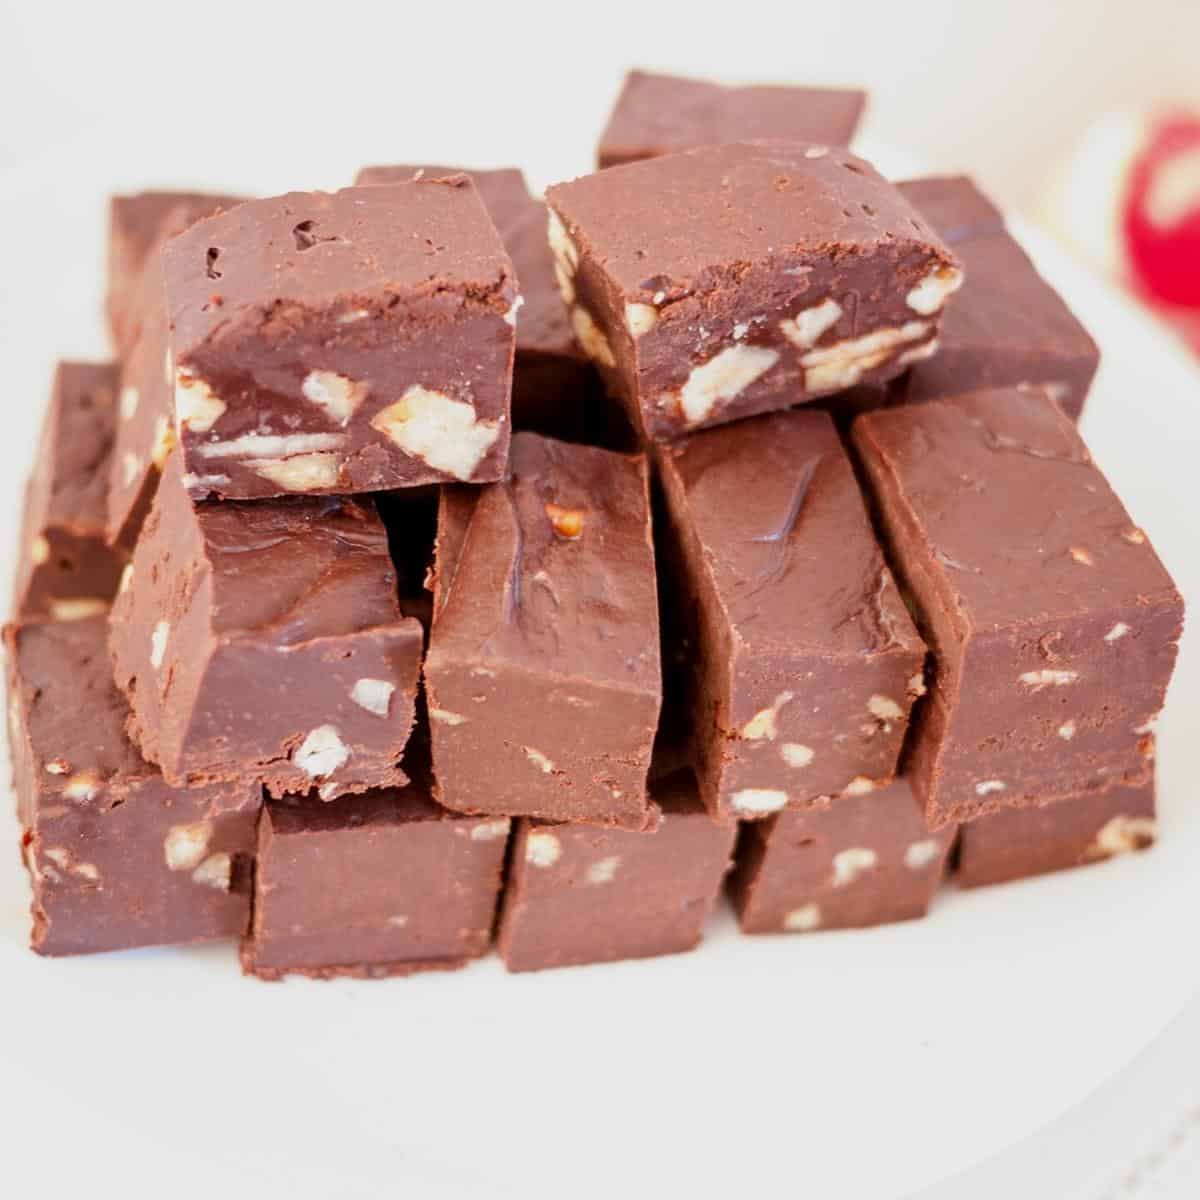 A stack of chocolate Fudge squares